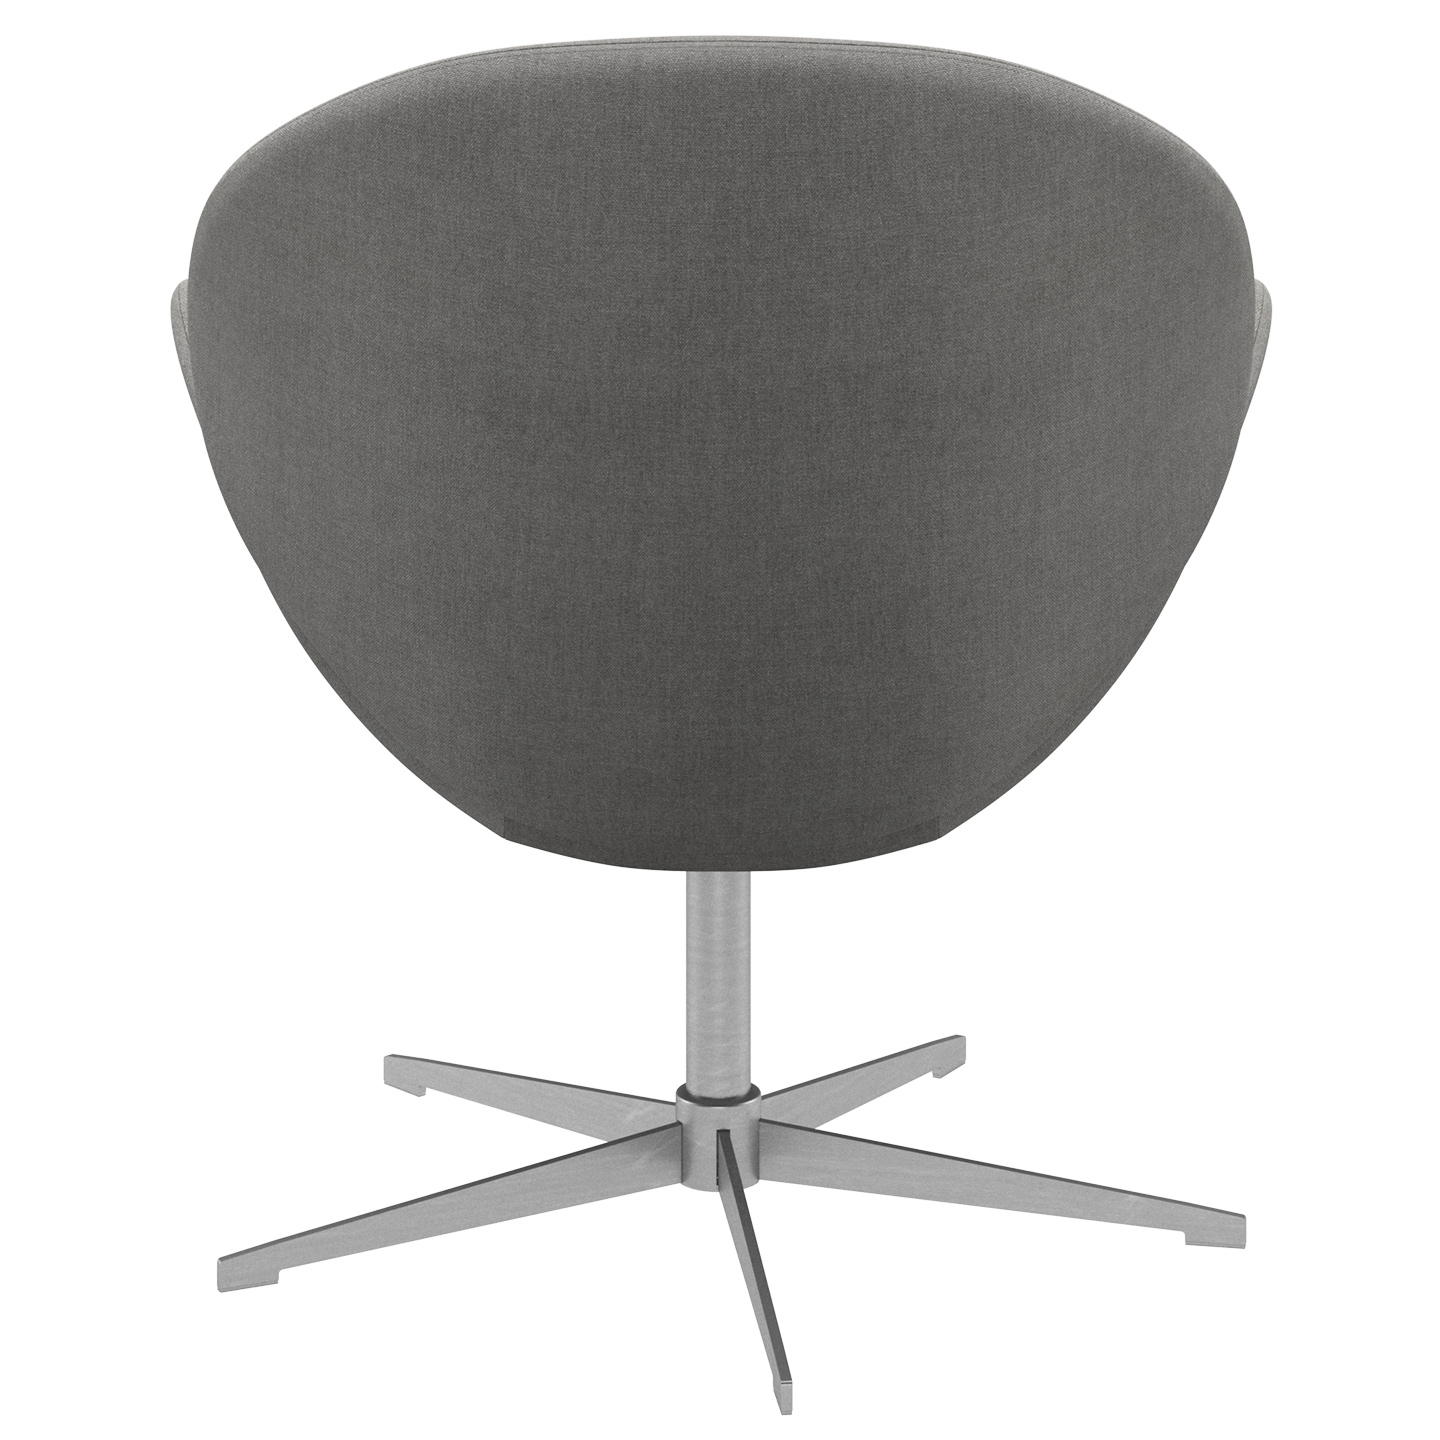 Ogi lounge chair from BoConcept